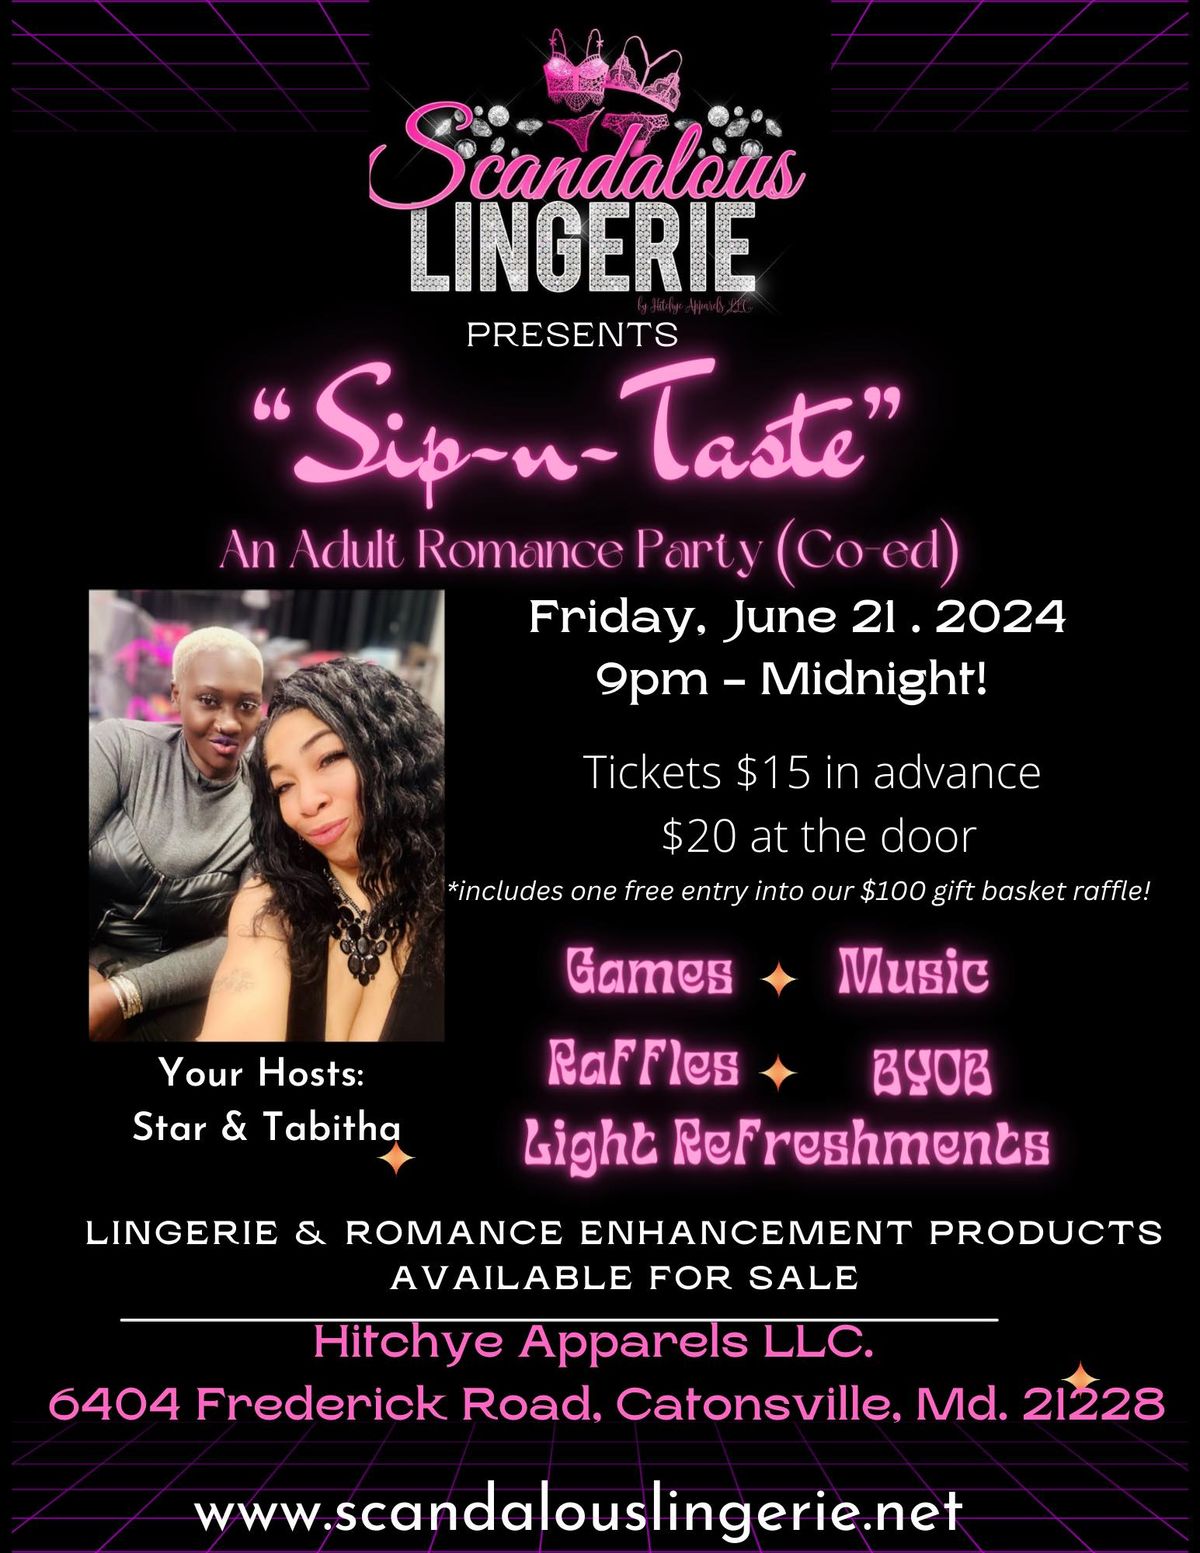 "Sip-n-Taste" Adult Lingerie & Romance Party (Singles & Couples Welcome!)